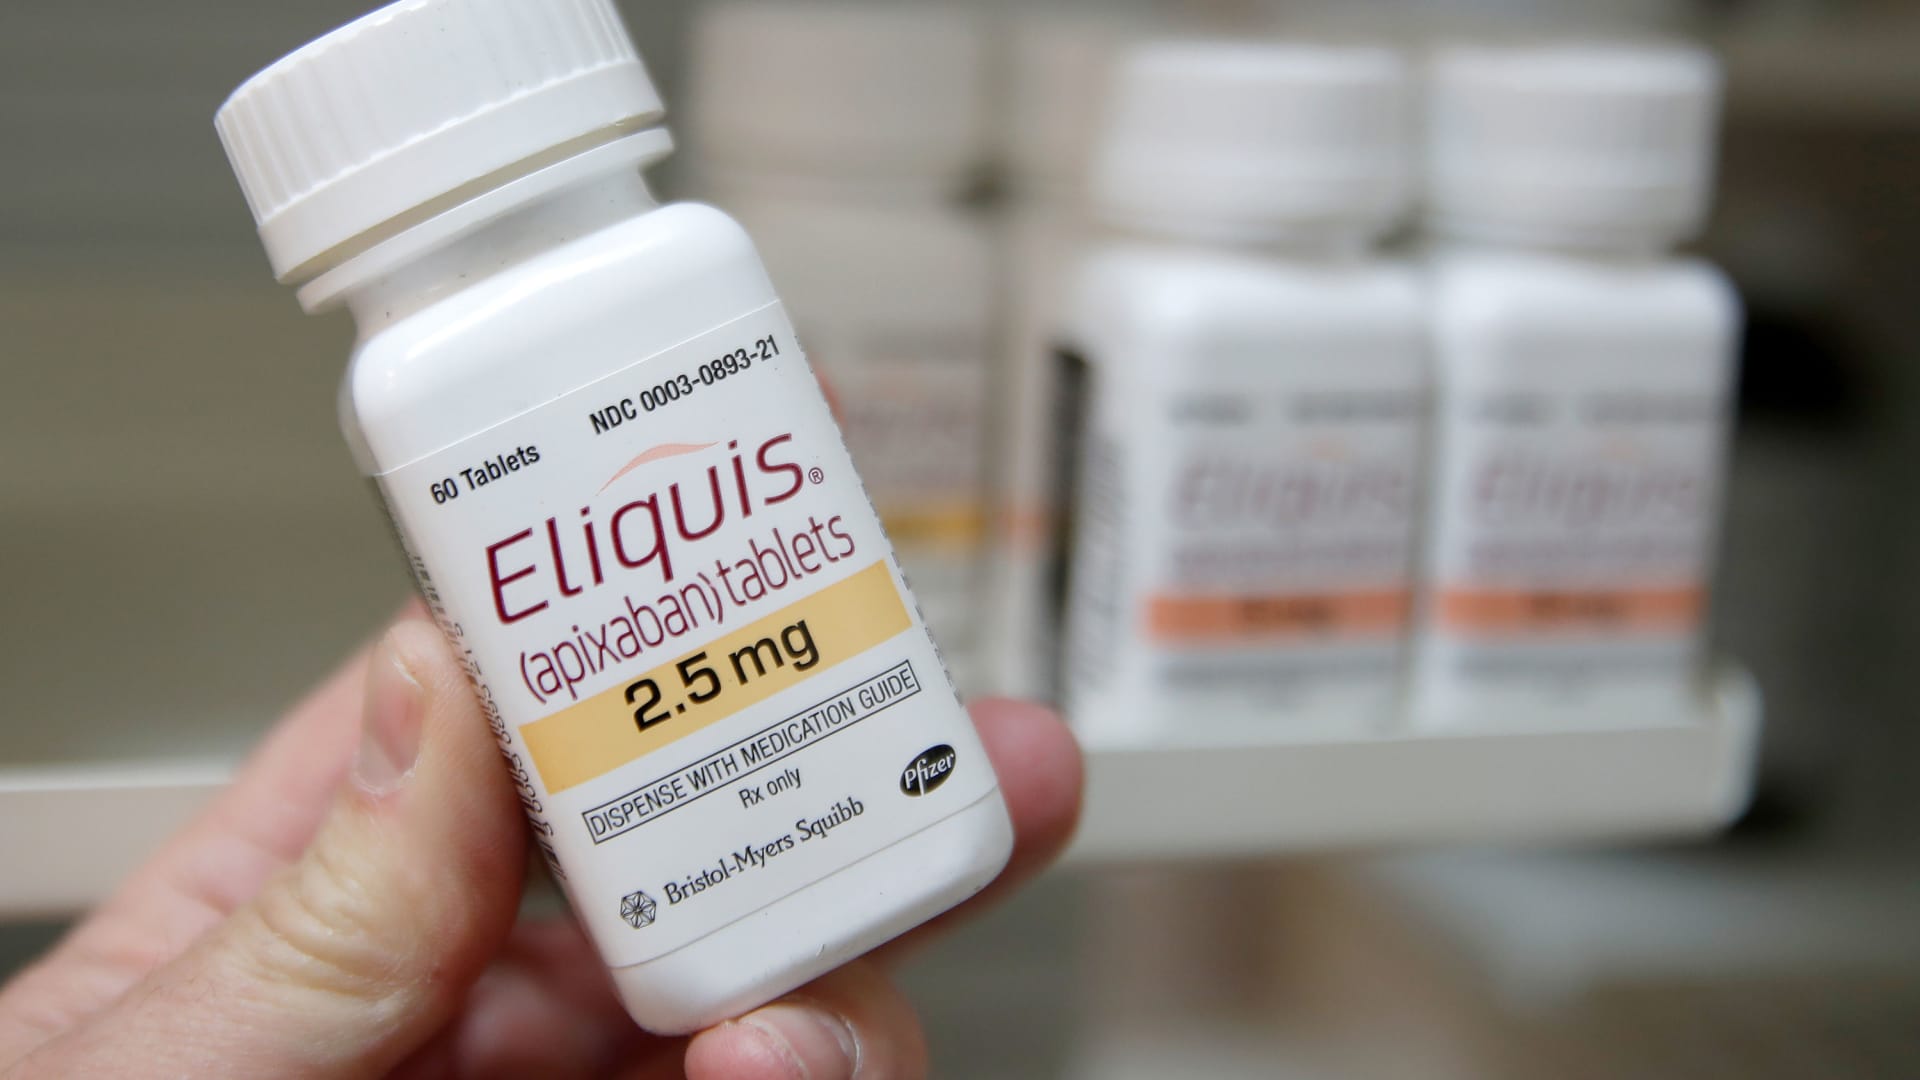 A pharmacist holds a bottle of the drug Eliquis, made by Pfizer Pharmaceuticals, at a pharmacy in Provo, Utah, January 9, 2020.